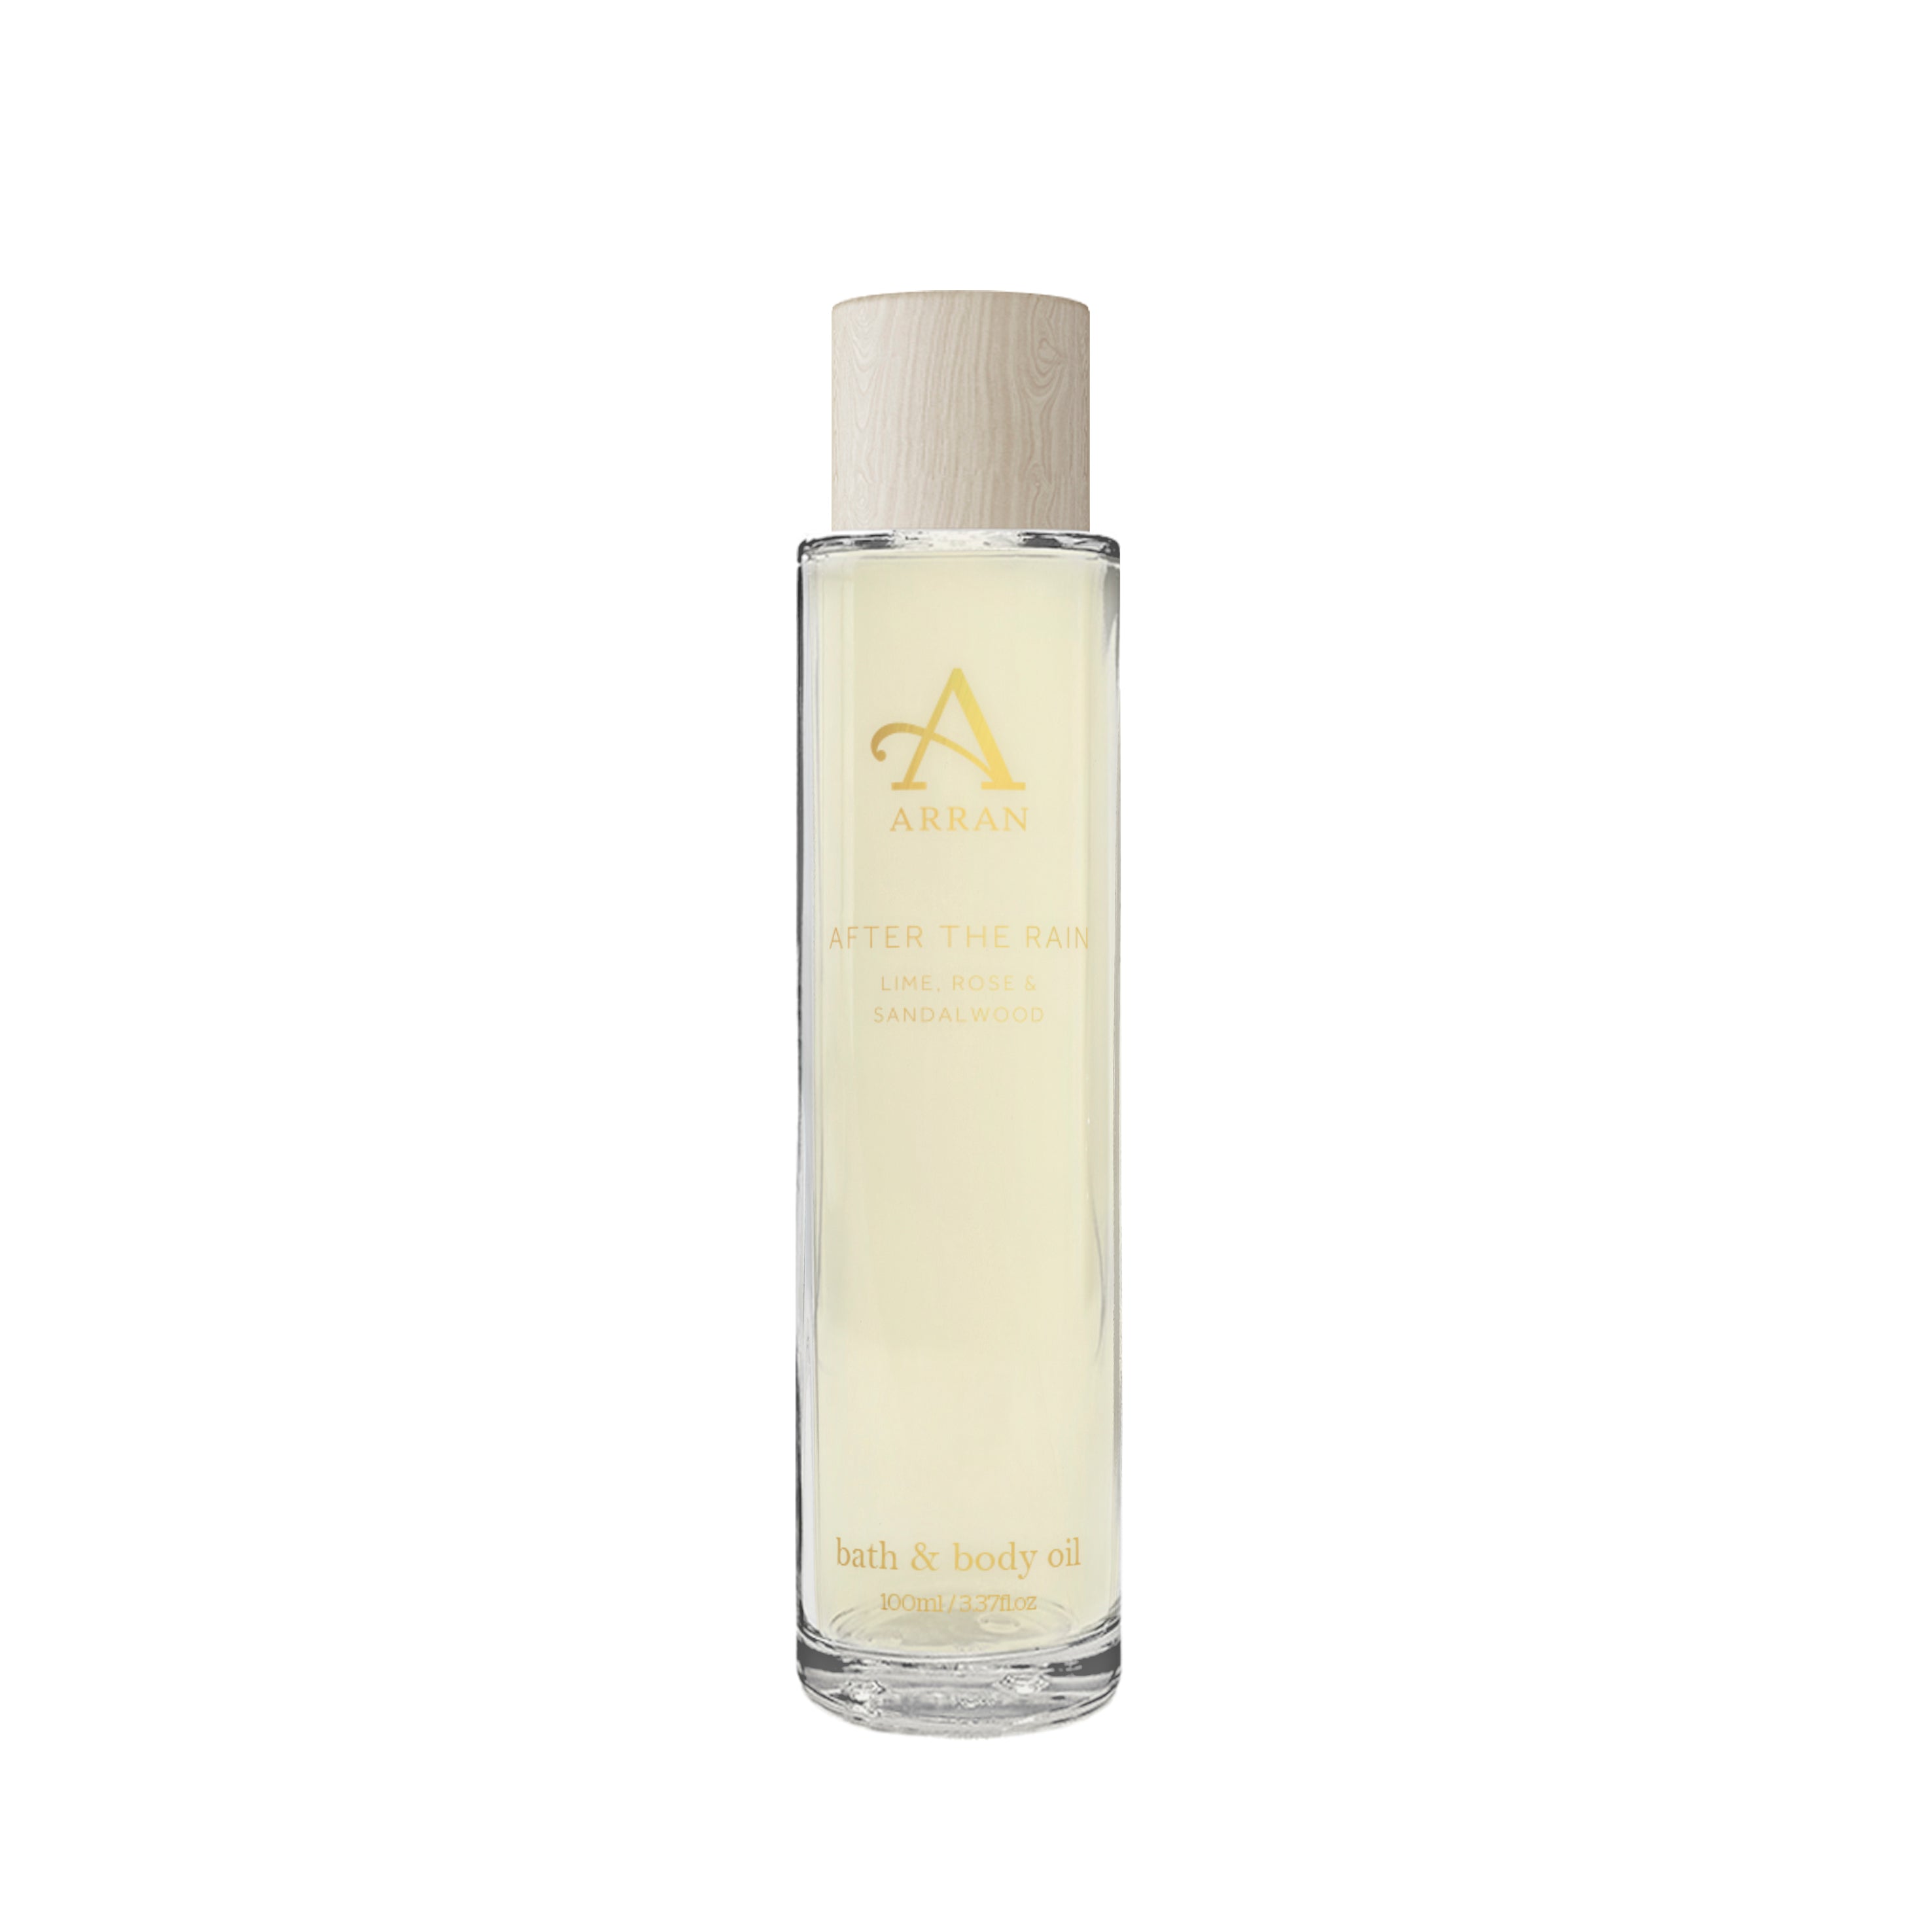 An image of ARRAN After the Rain Bath & Body Oil | Made in Scotland | Lime, Rose & Sandalwoo...